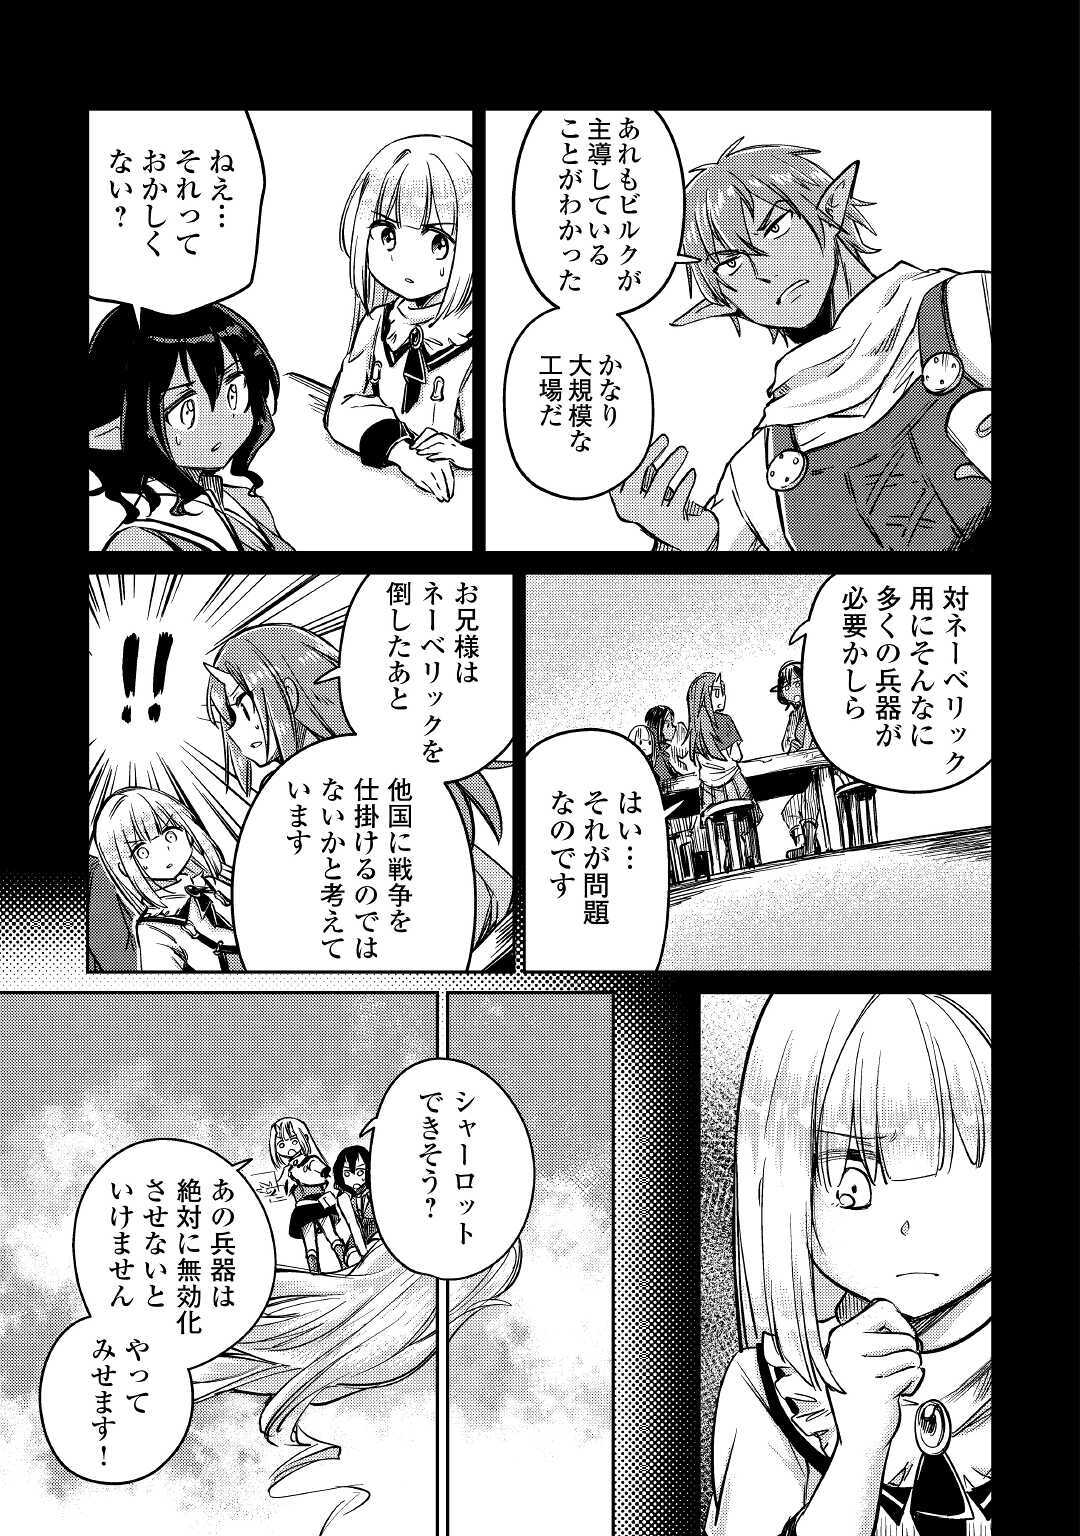 The Former Structural Researcher’s Story of Otherworldly Adventure 第27話 - Page 21